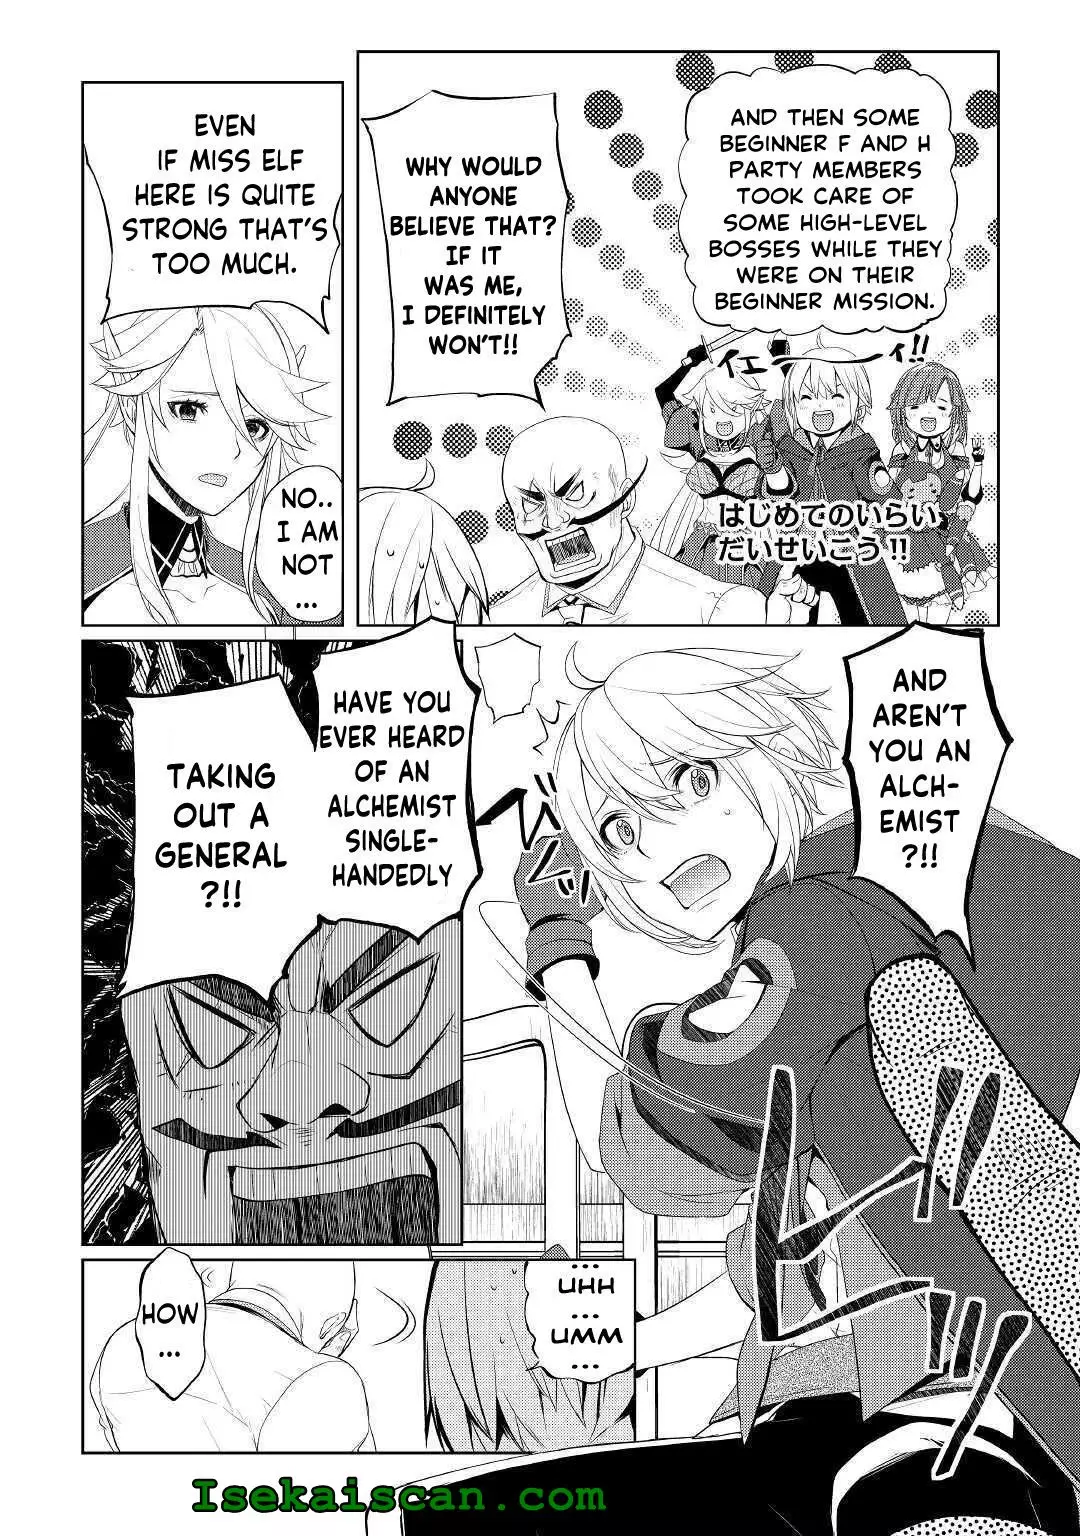 Someday Will I Be The Greatest Alchemist? - 21 page 20-789c9117